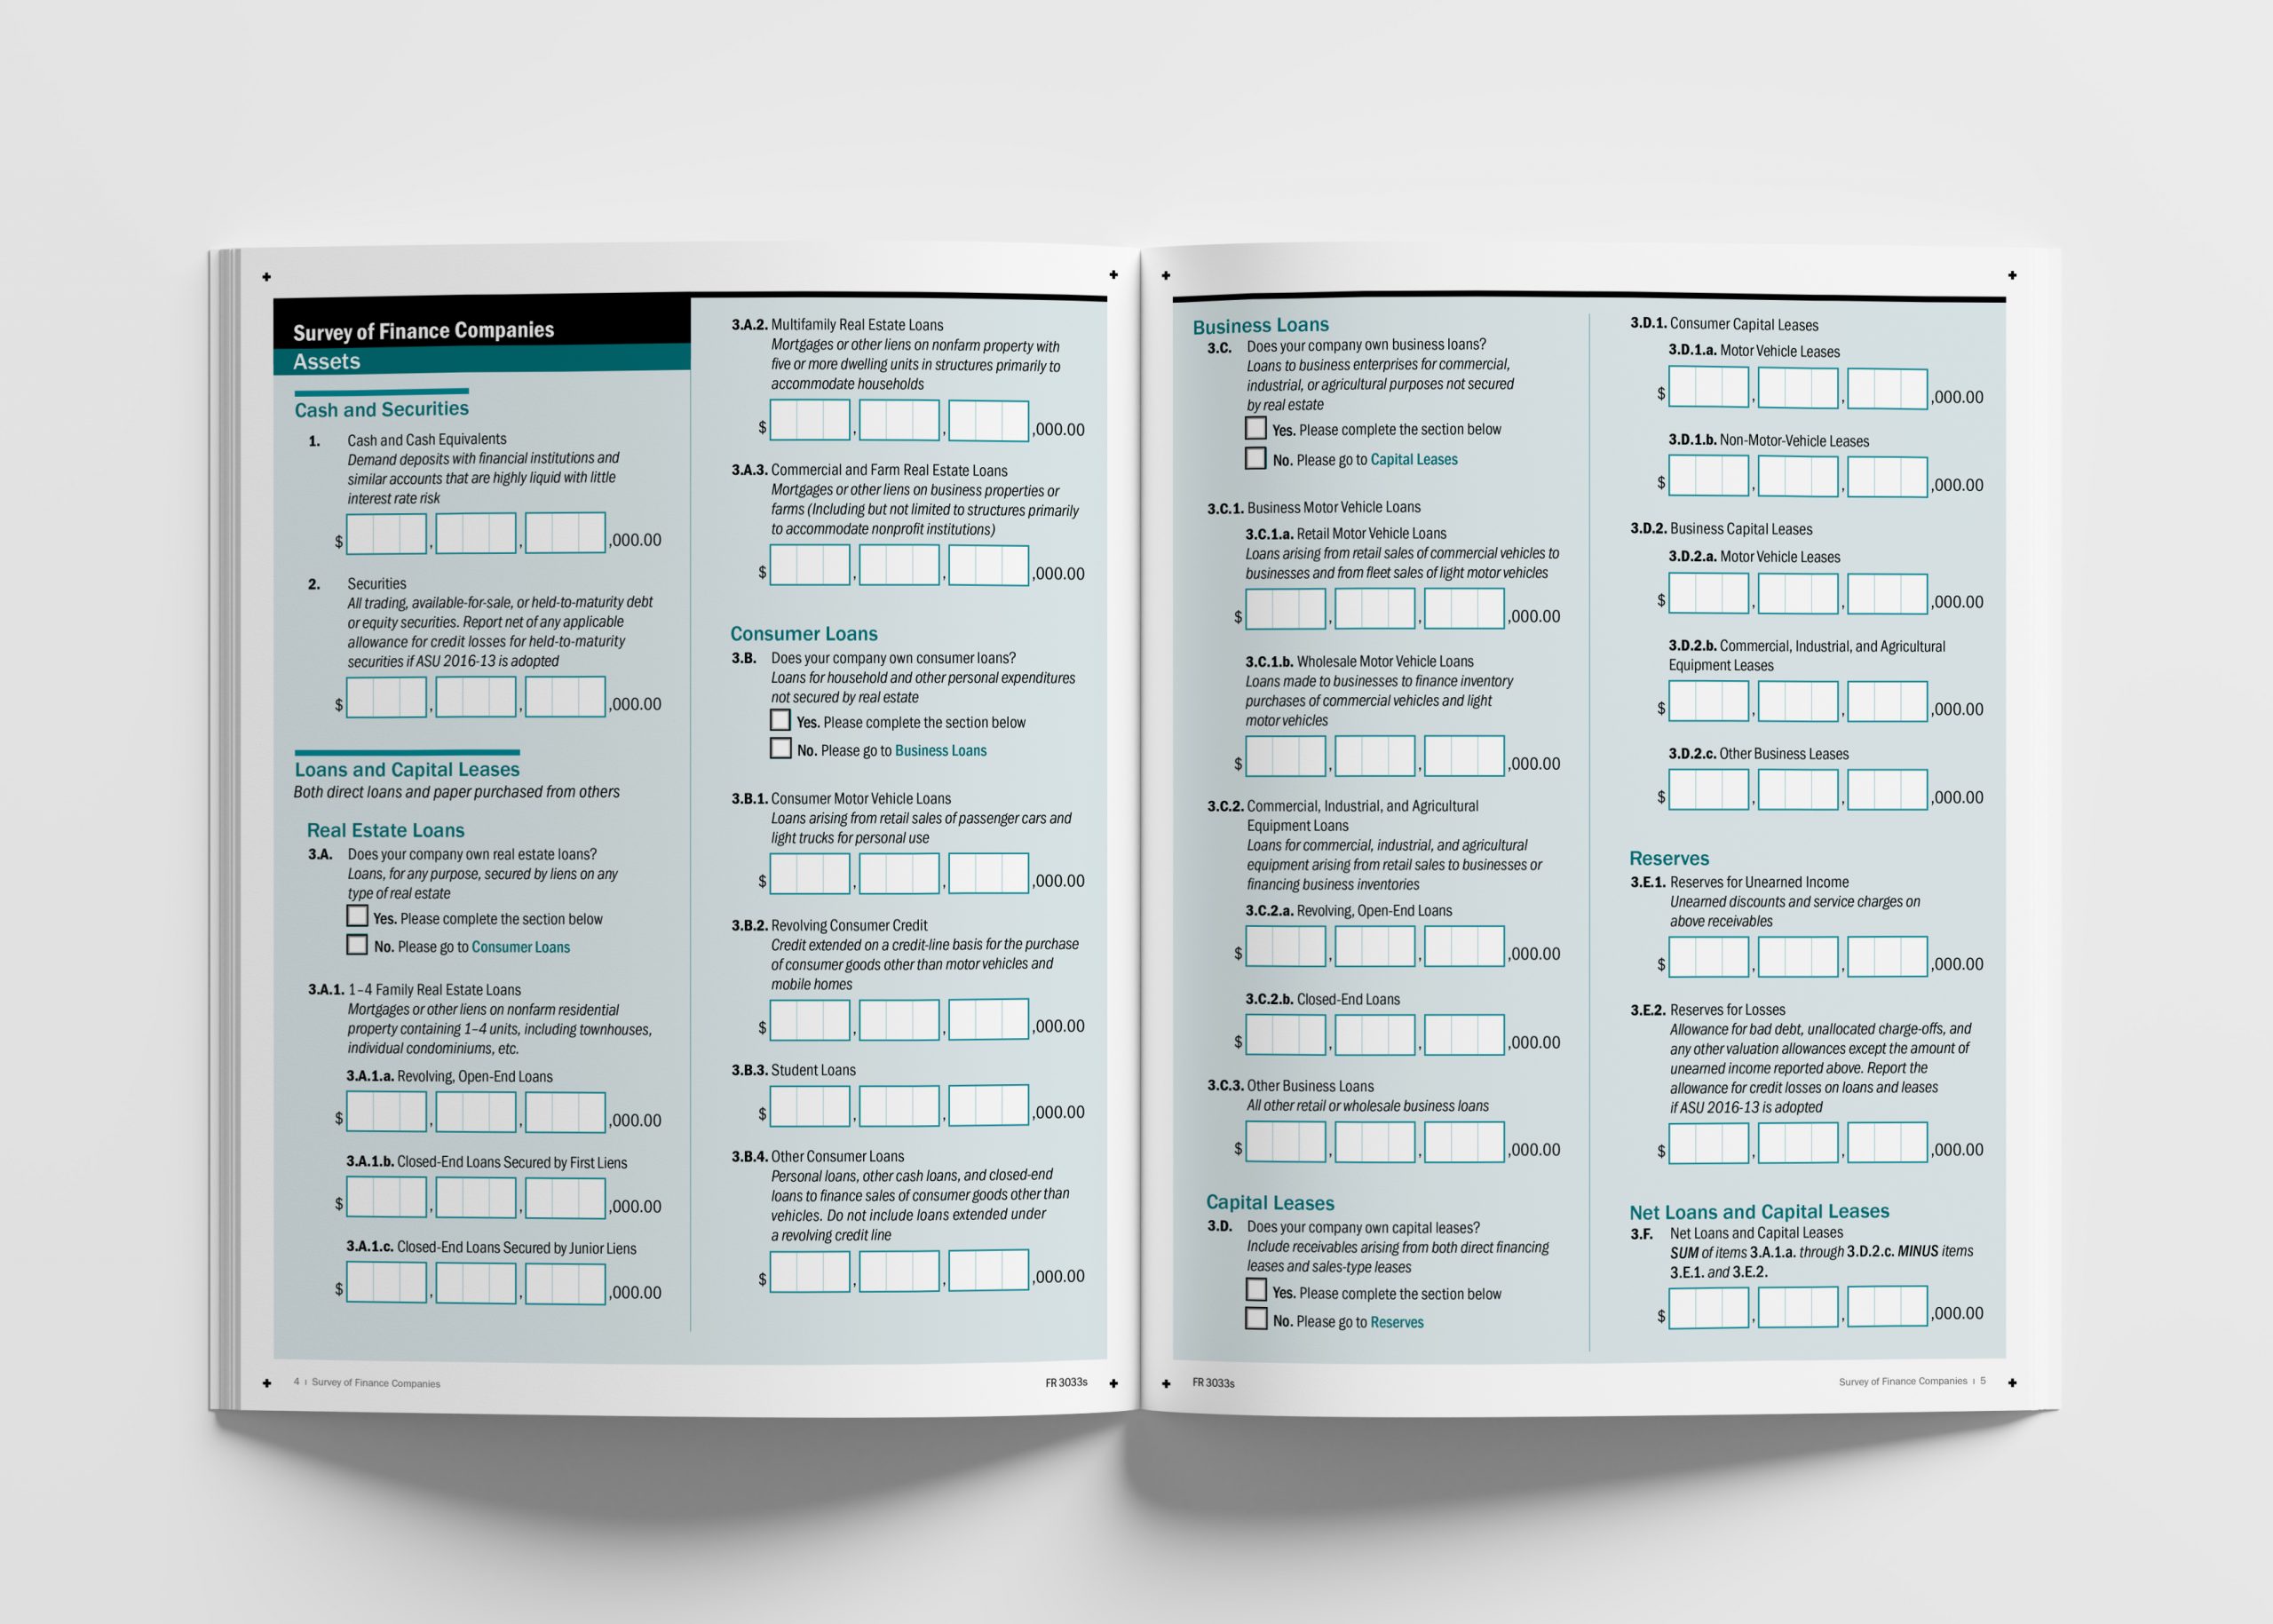 Interior spread of the Survey of Finance Companies